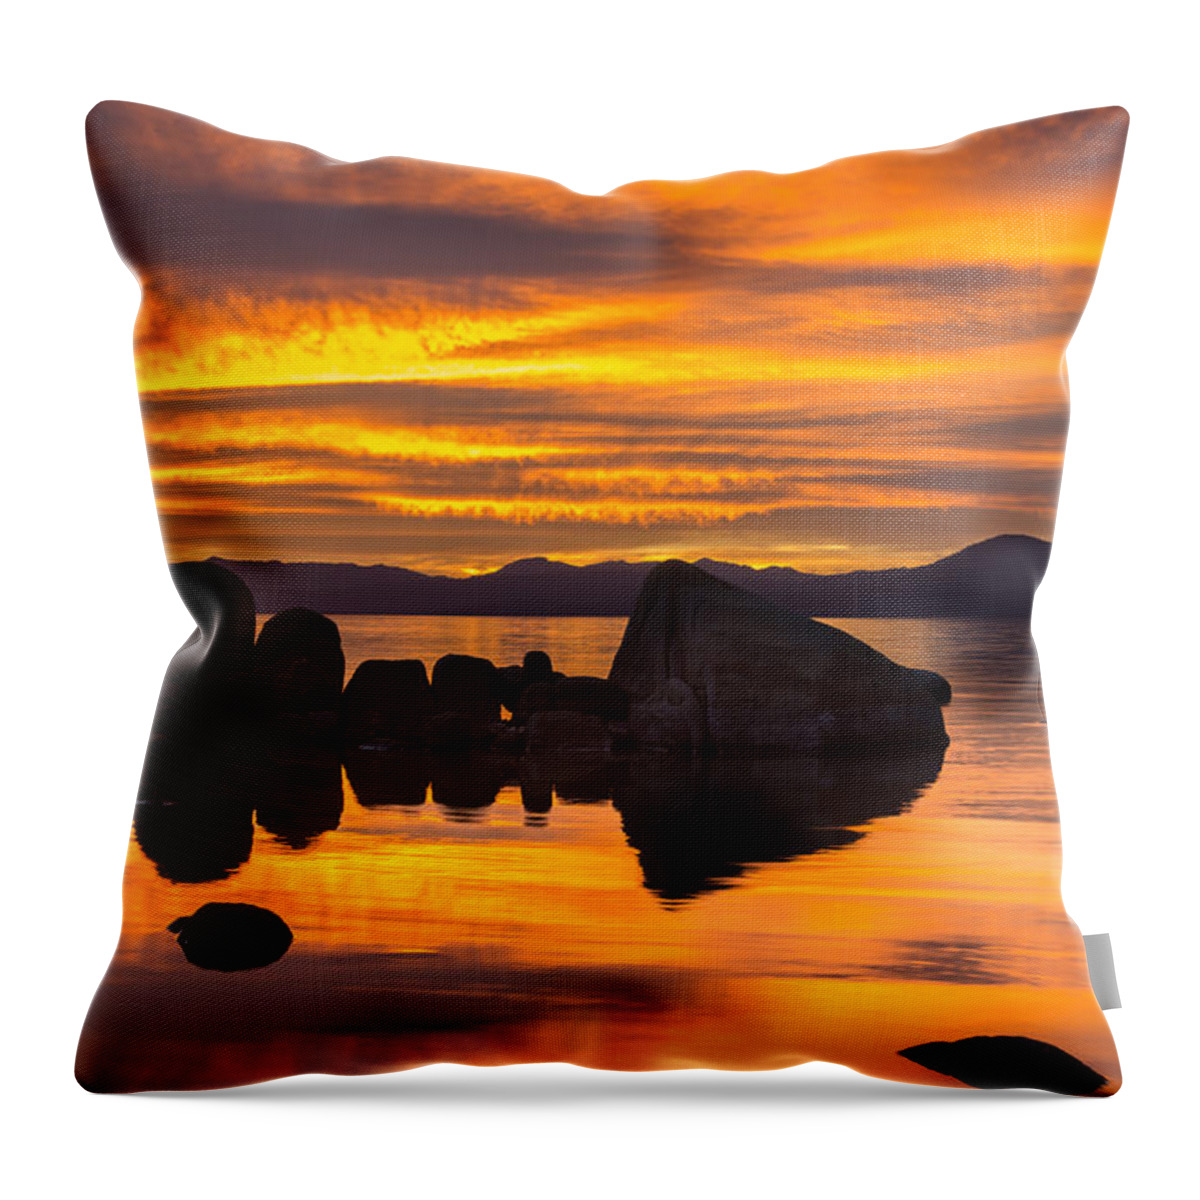 Landscape Throw Pillow featuring the photograph Sand Harbor Sun Rays by Marc Crumpler